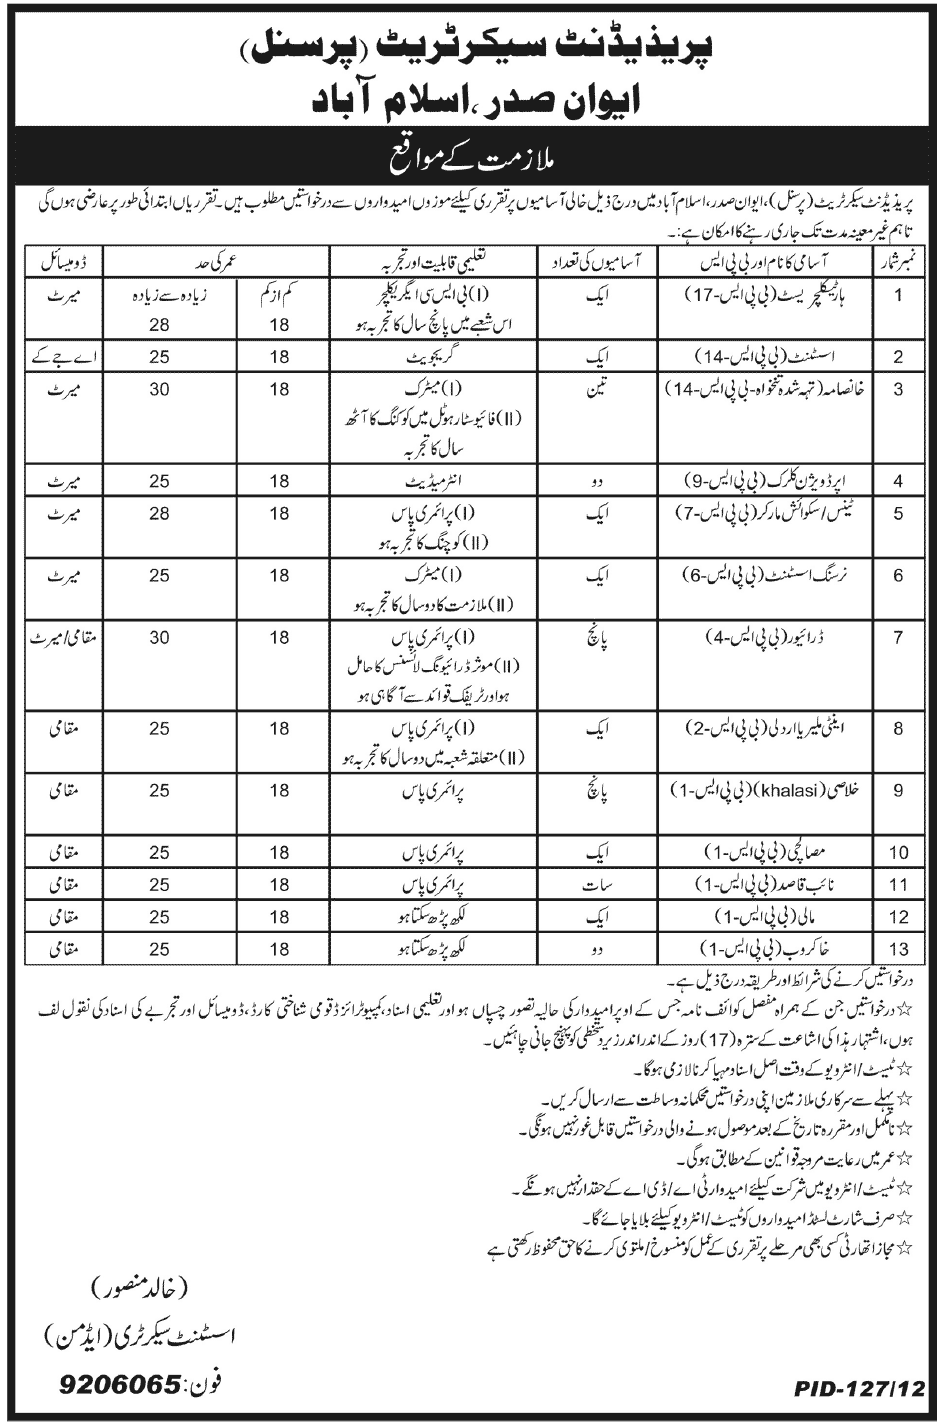 President Secretariat (Personnel) Government of Pakistan Requires Admin and Support Staff (Govt. job)